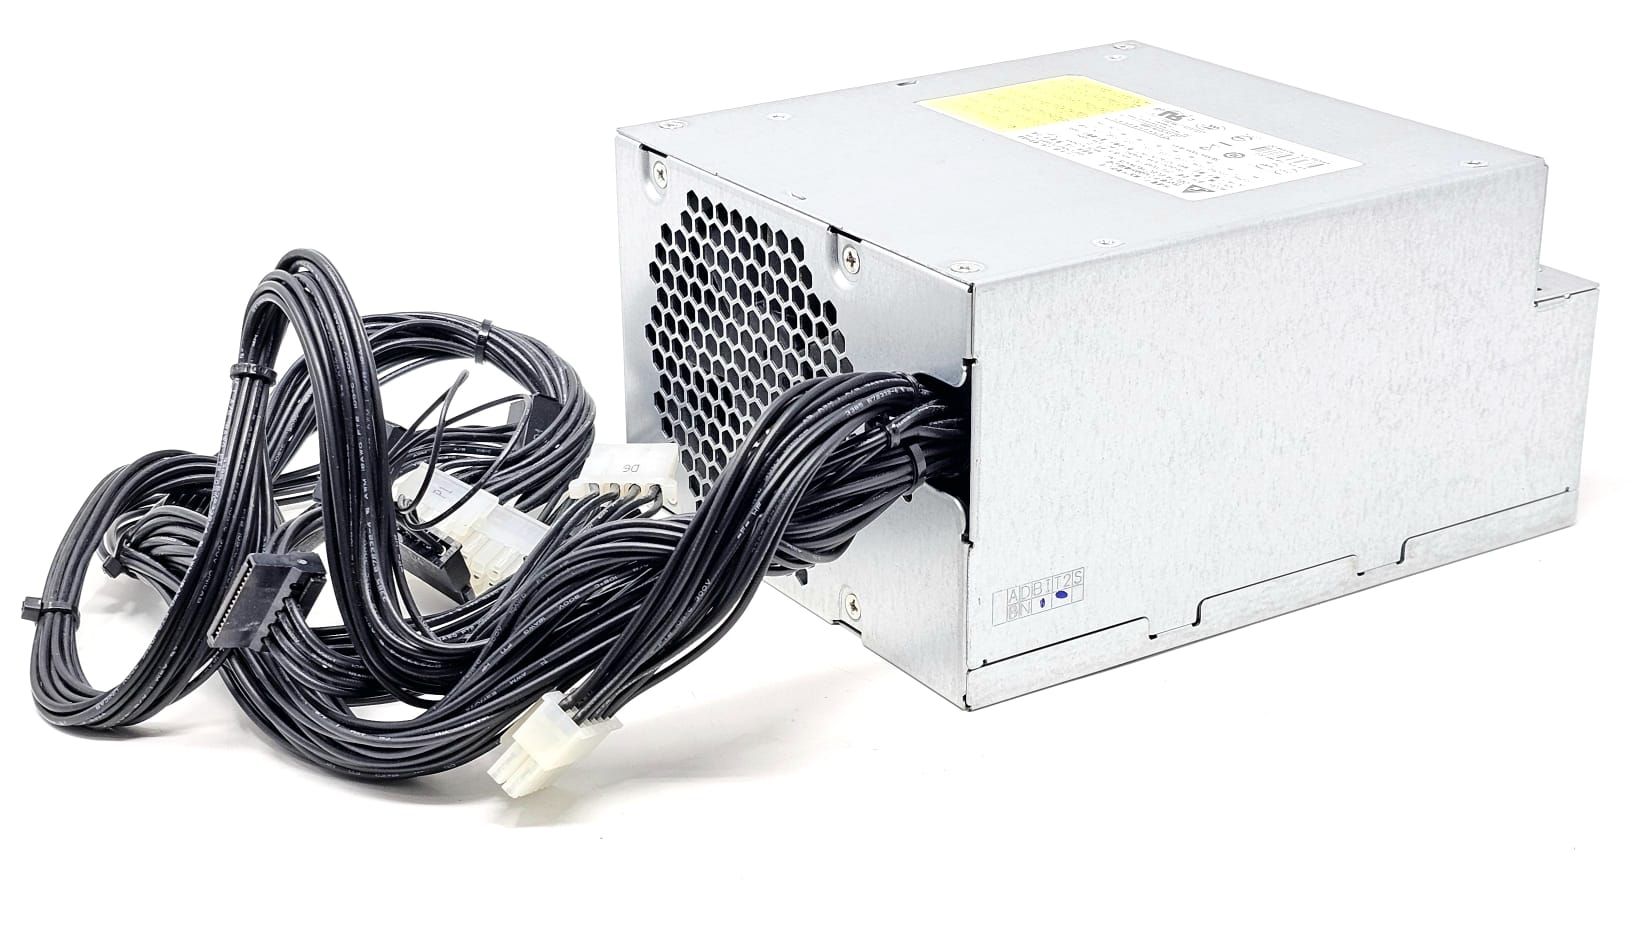 HP 758467-001 - Power supply - Rated at 700 Watts, 90% efficient 